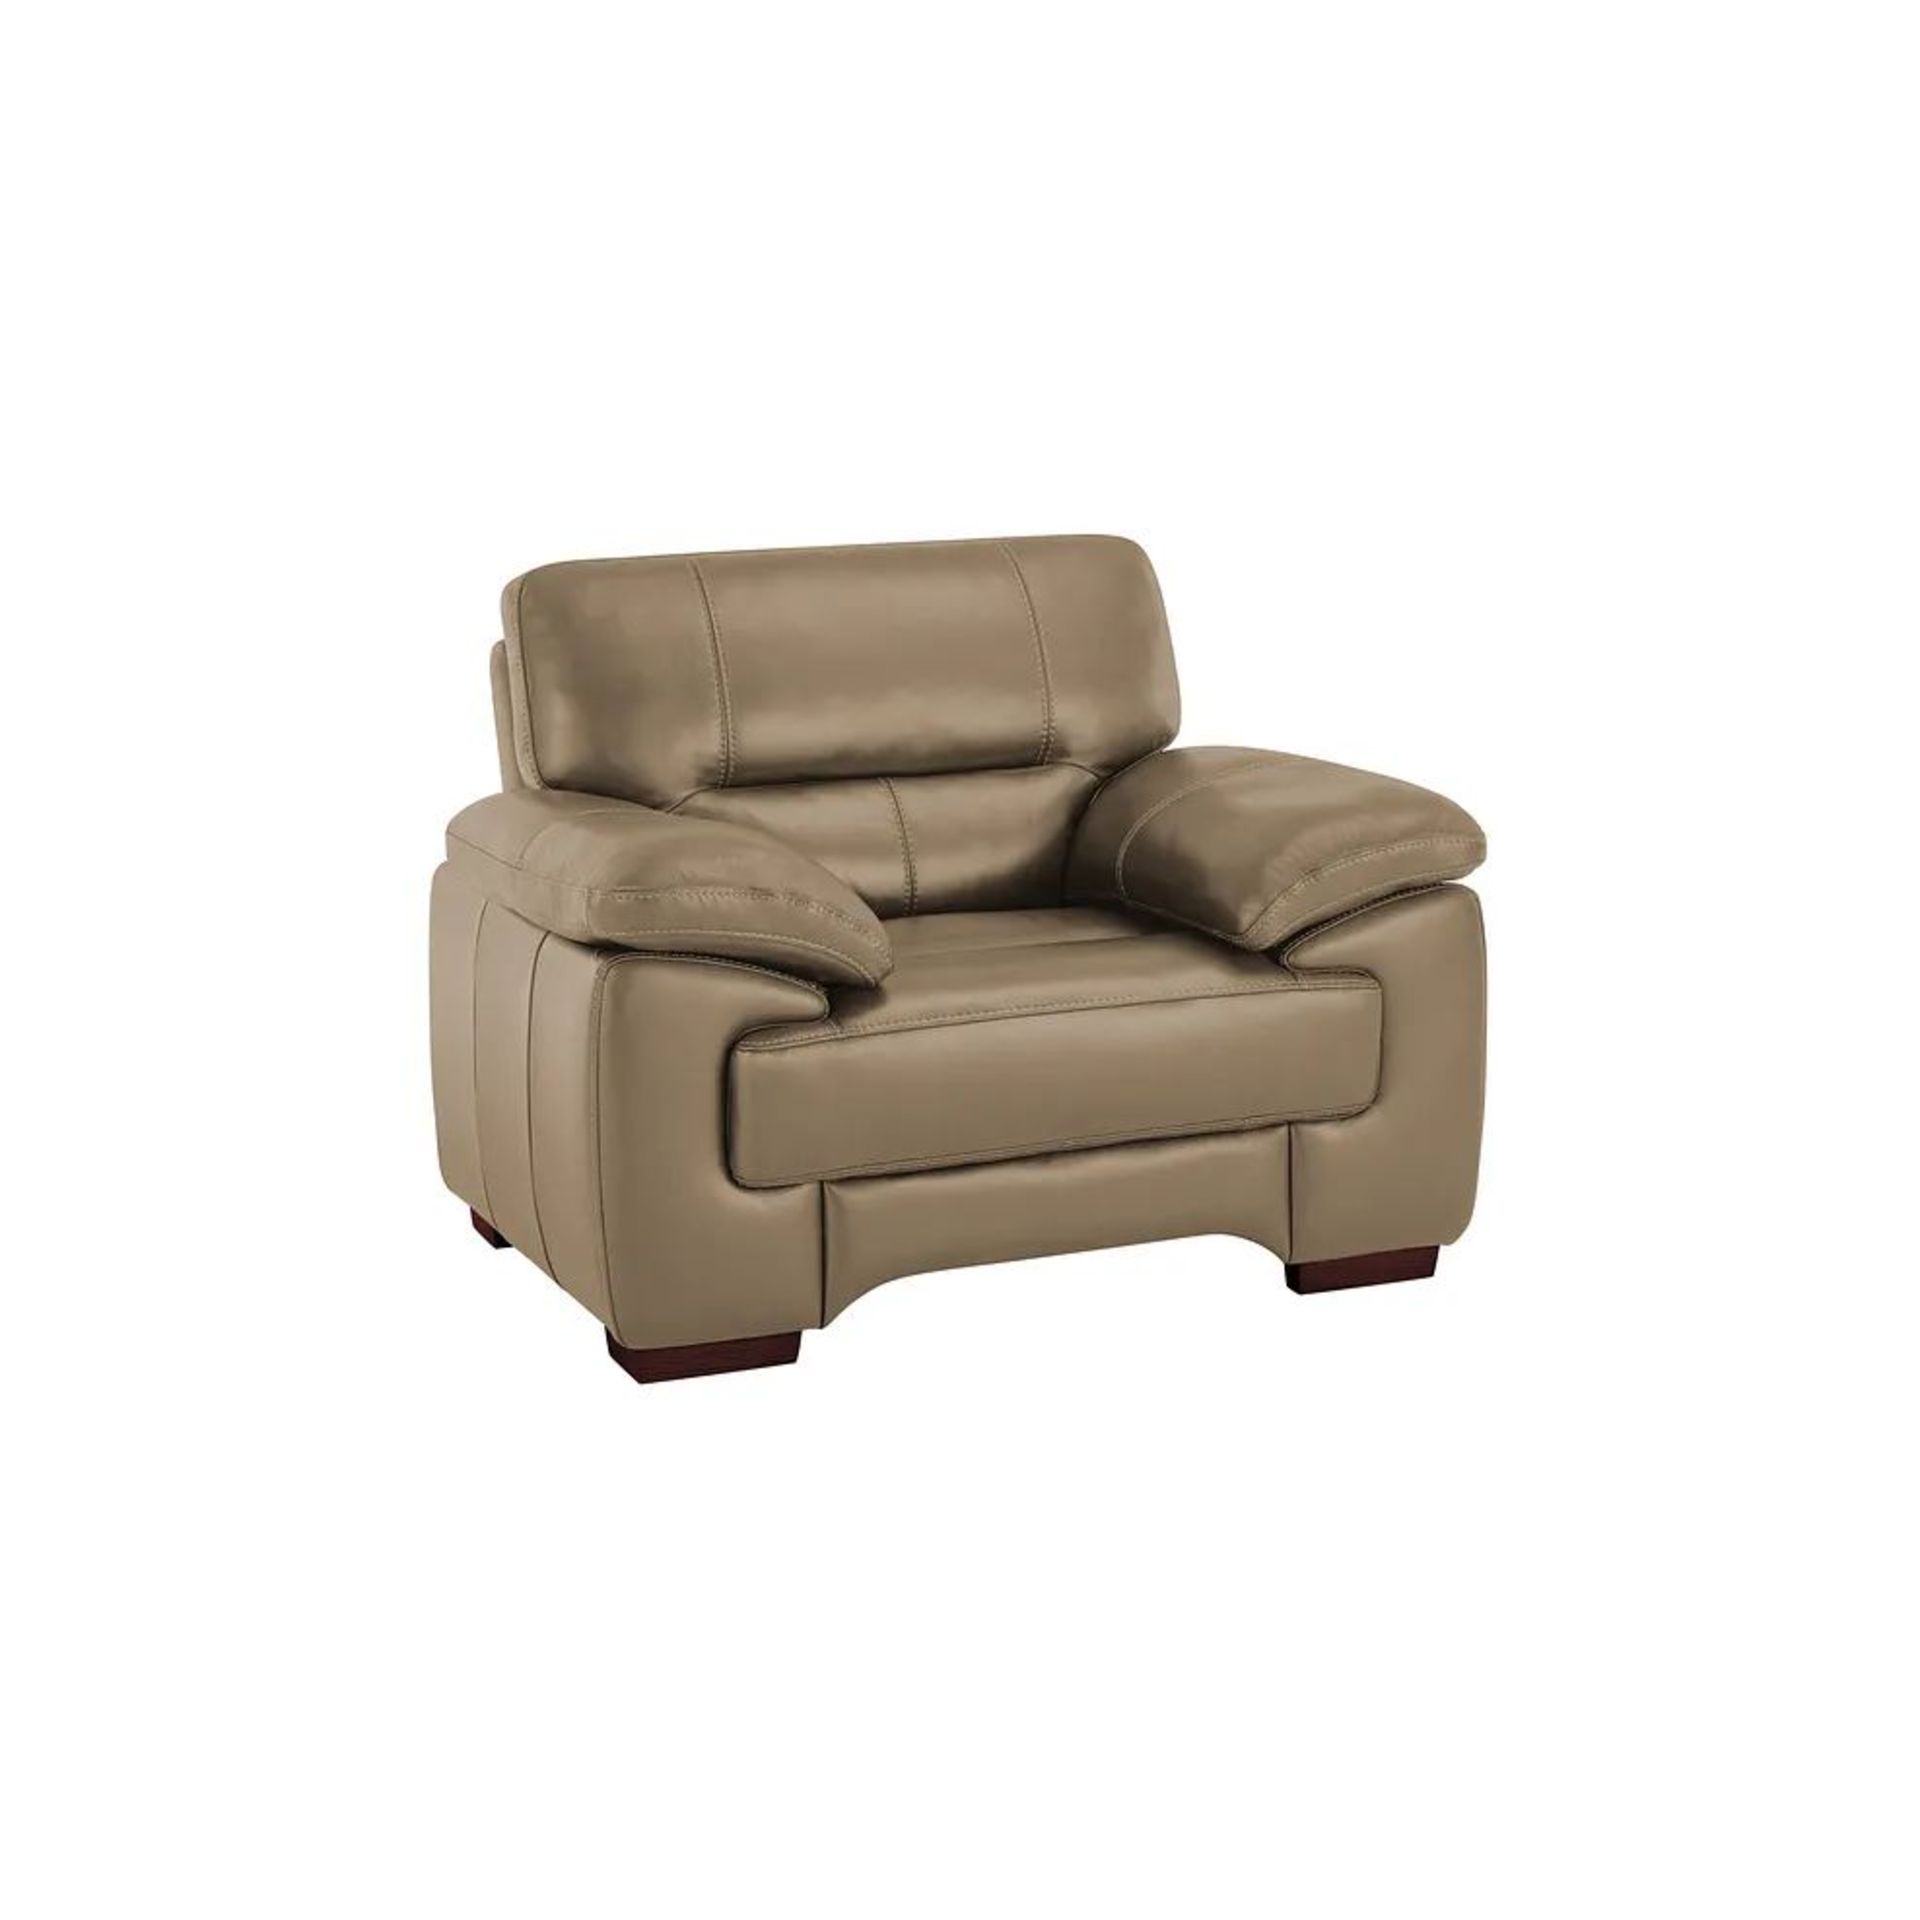 BRAND NEW ARLINGTON Armchair - BEIGE LEATHER. RRP £1099. Create a traditional and homely feel in